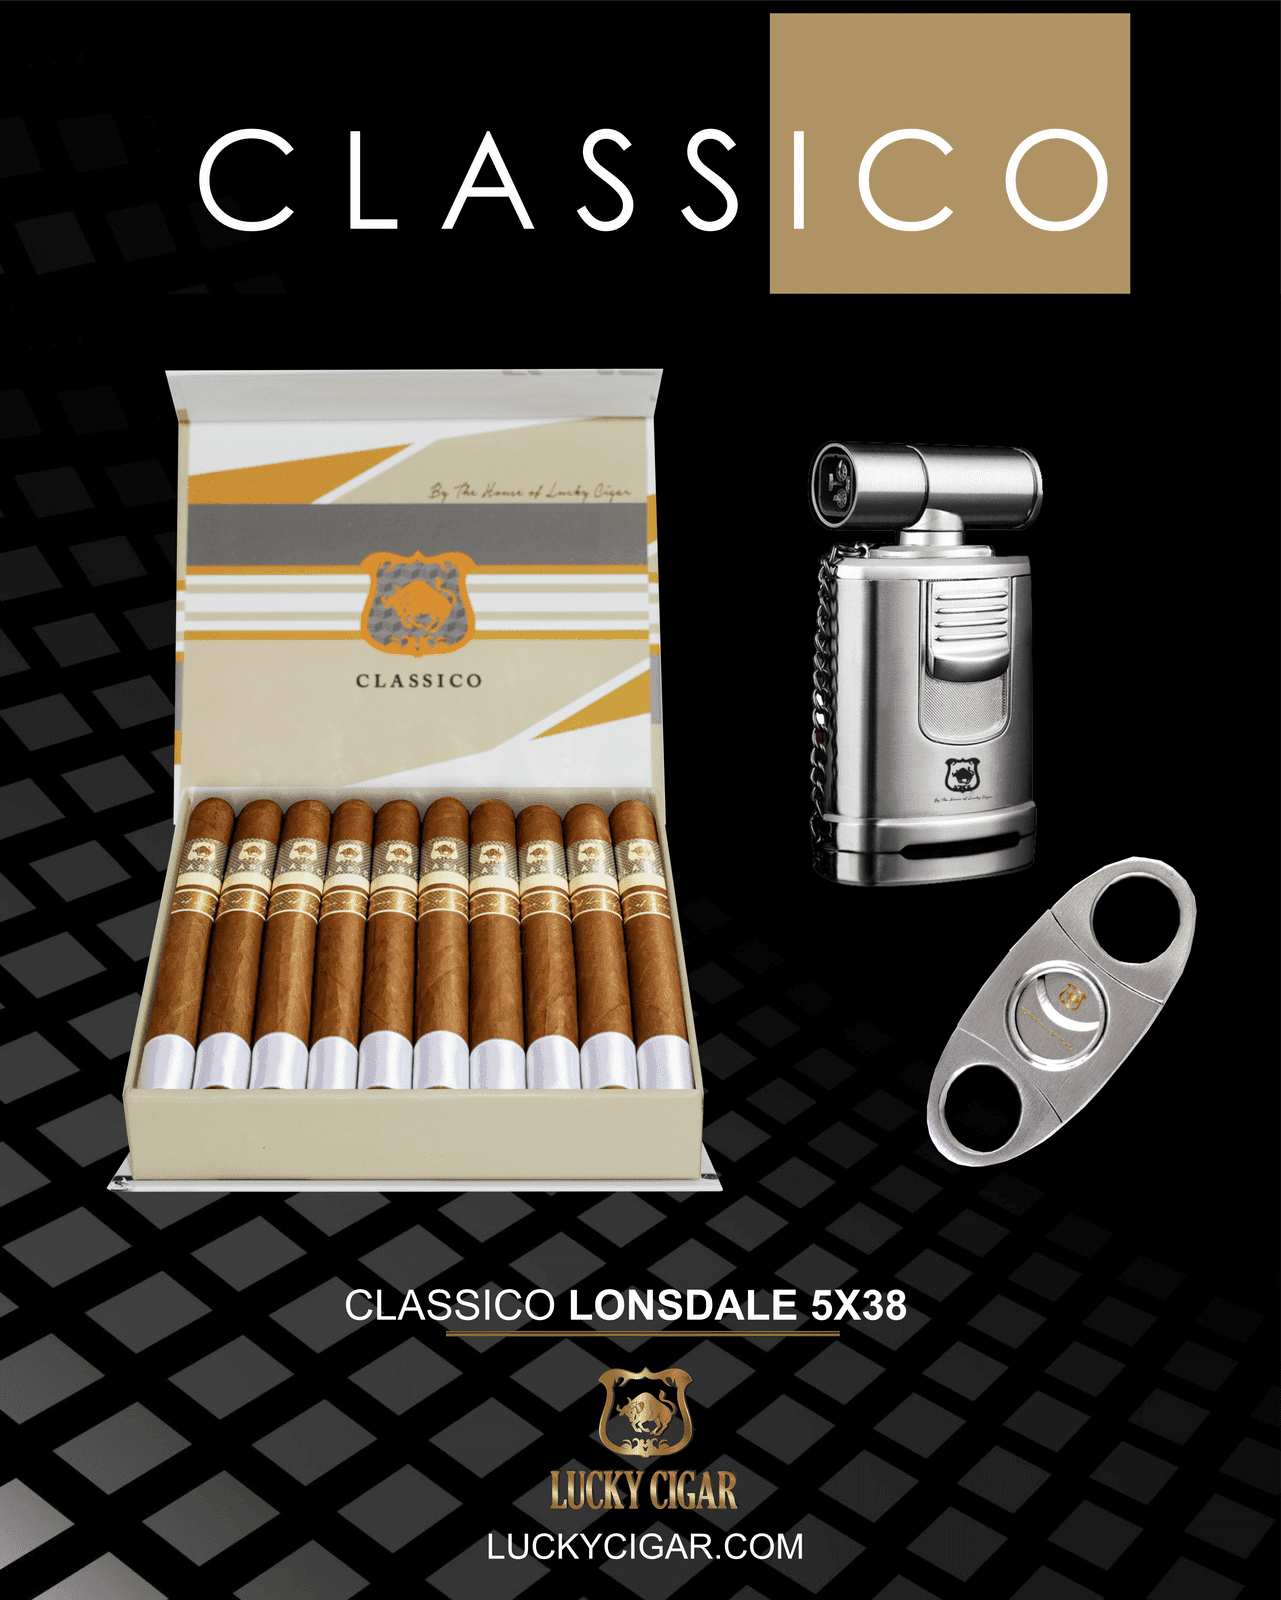 Classic Cigars - Classico by Lucky Cigar: Set of Lonsdale 5x38 Box of 20 with Torch, Cutter